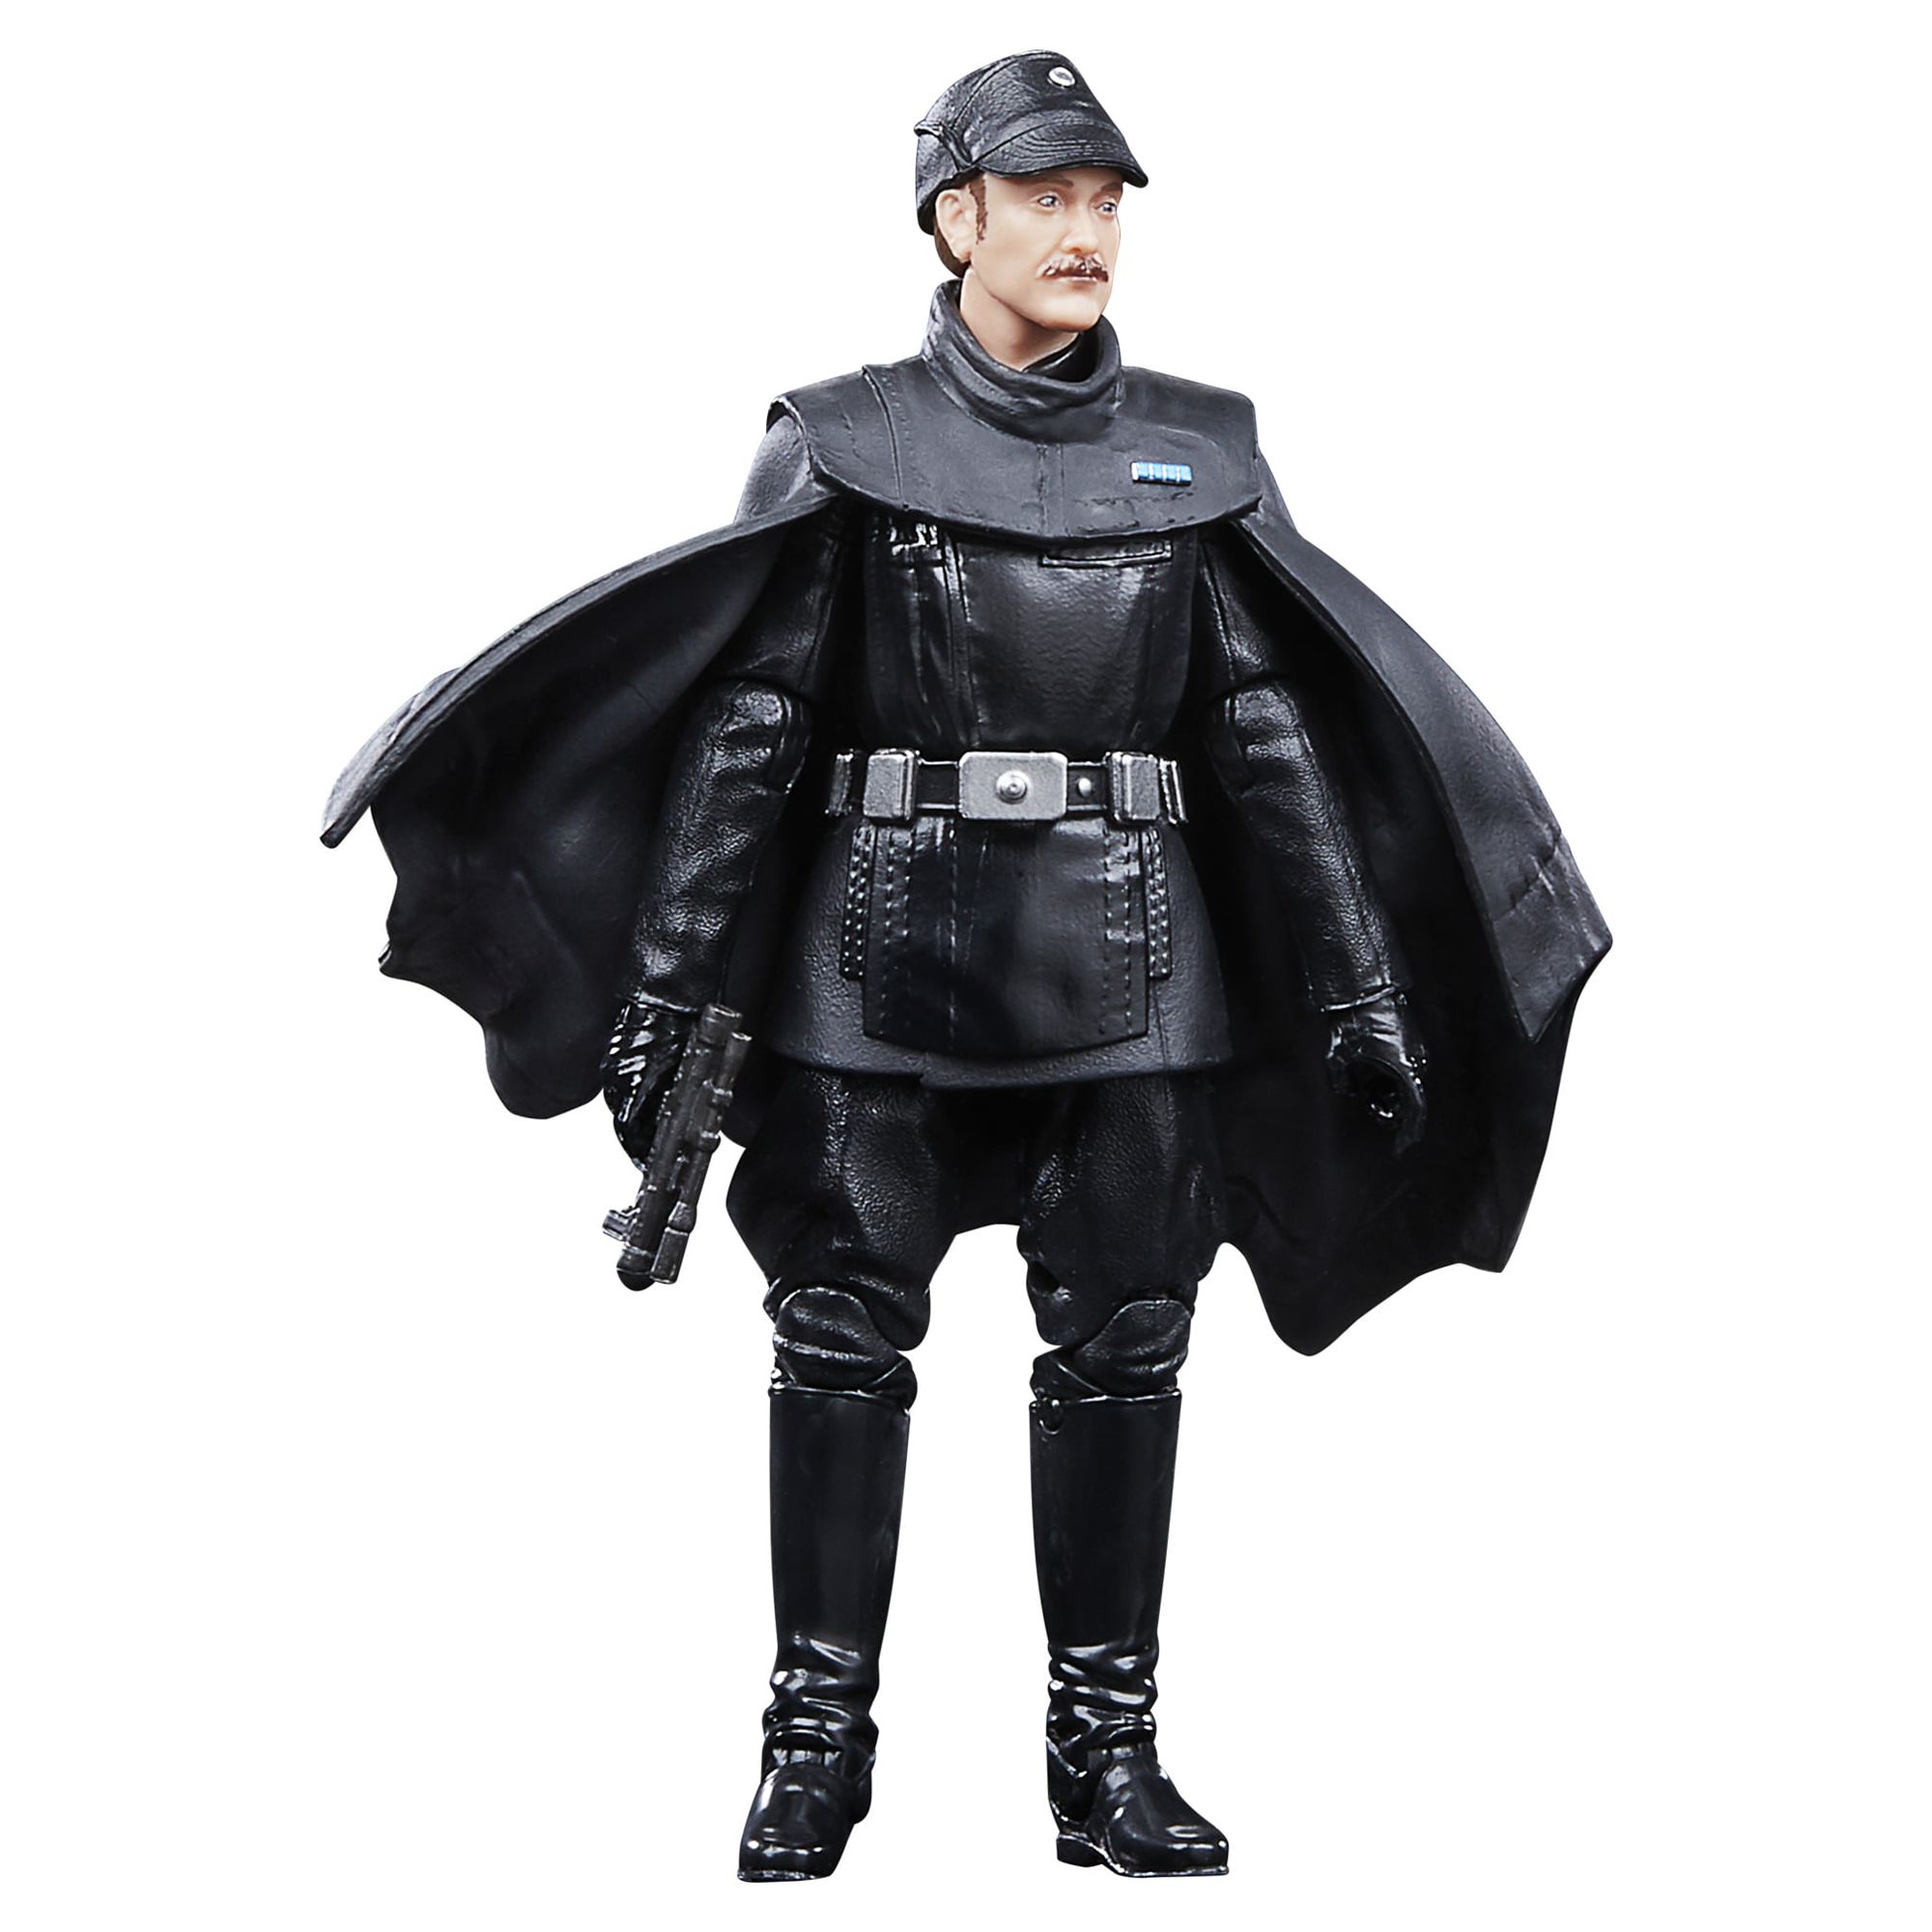 Star Wars: Black Series Imperial Officer (Dark Times) Kids Toy Action Figure for Boys and Girls Ages 4 5 6 7 8 and Up, Only At Walmart - image 4 of 12